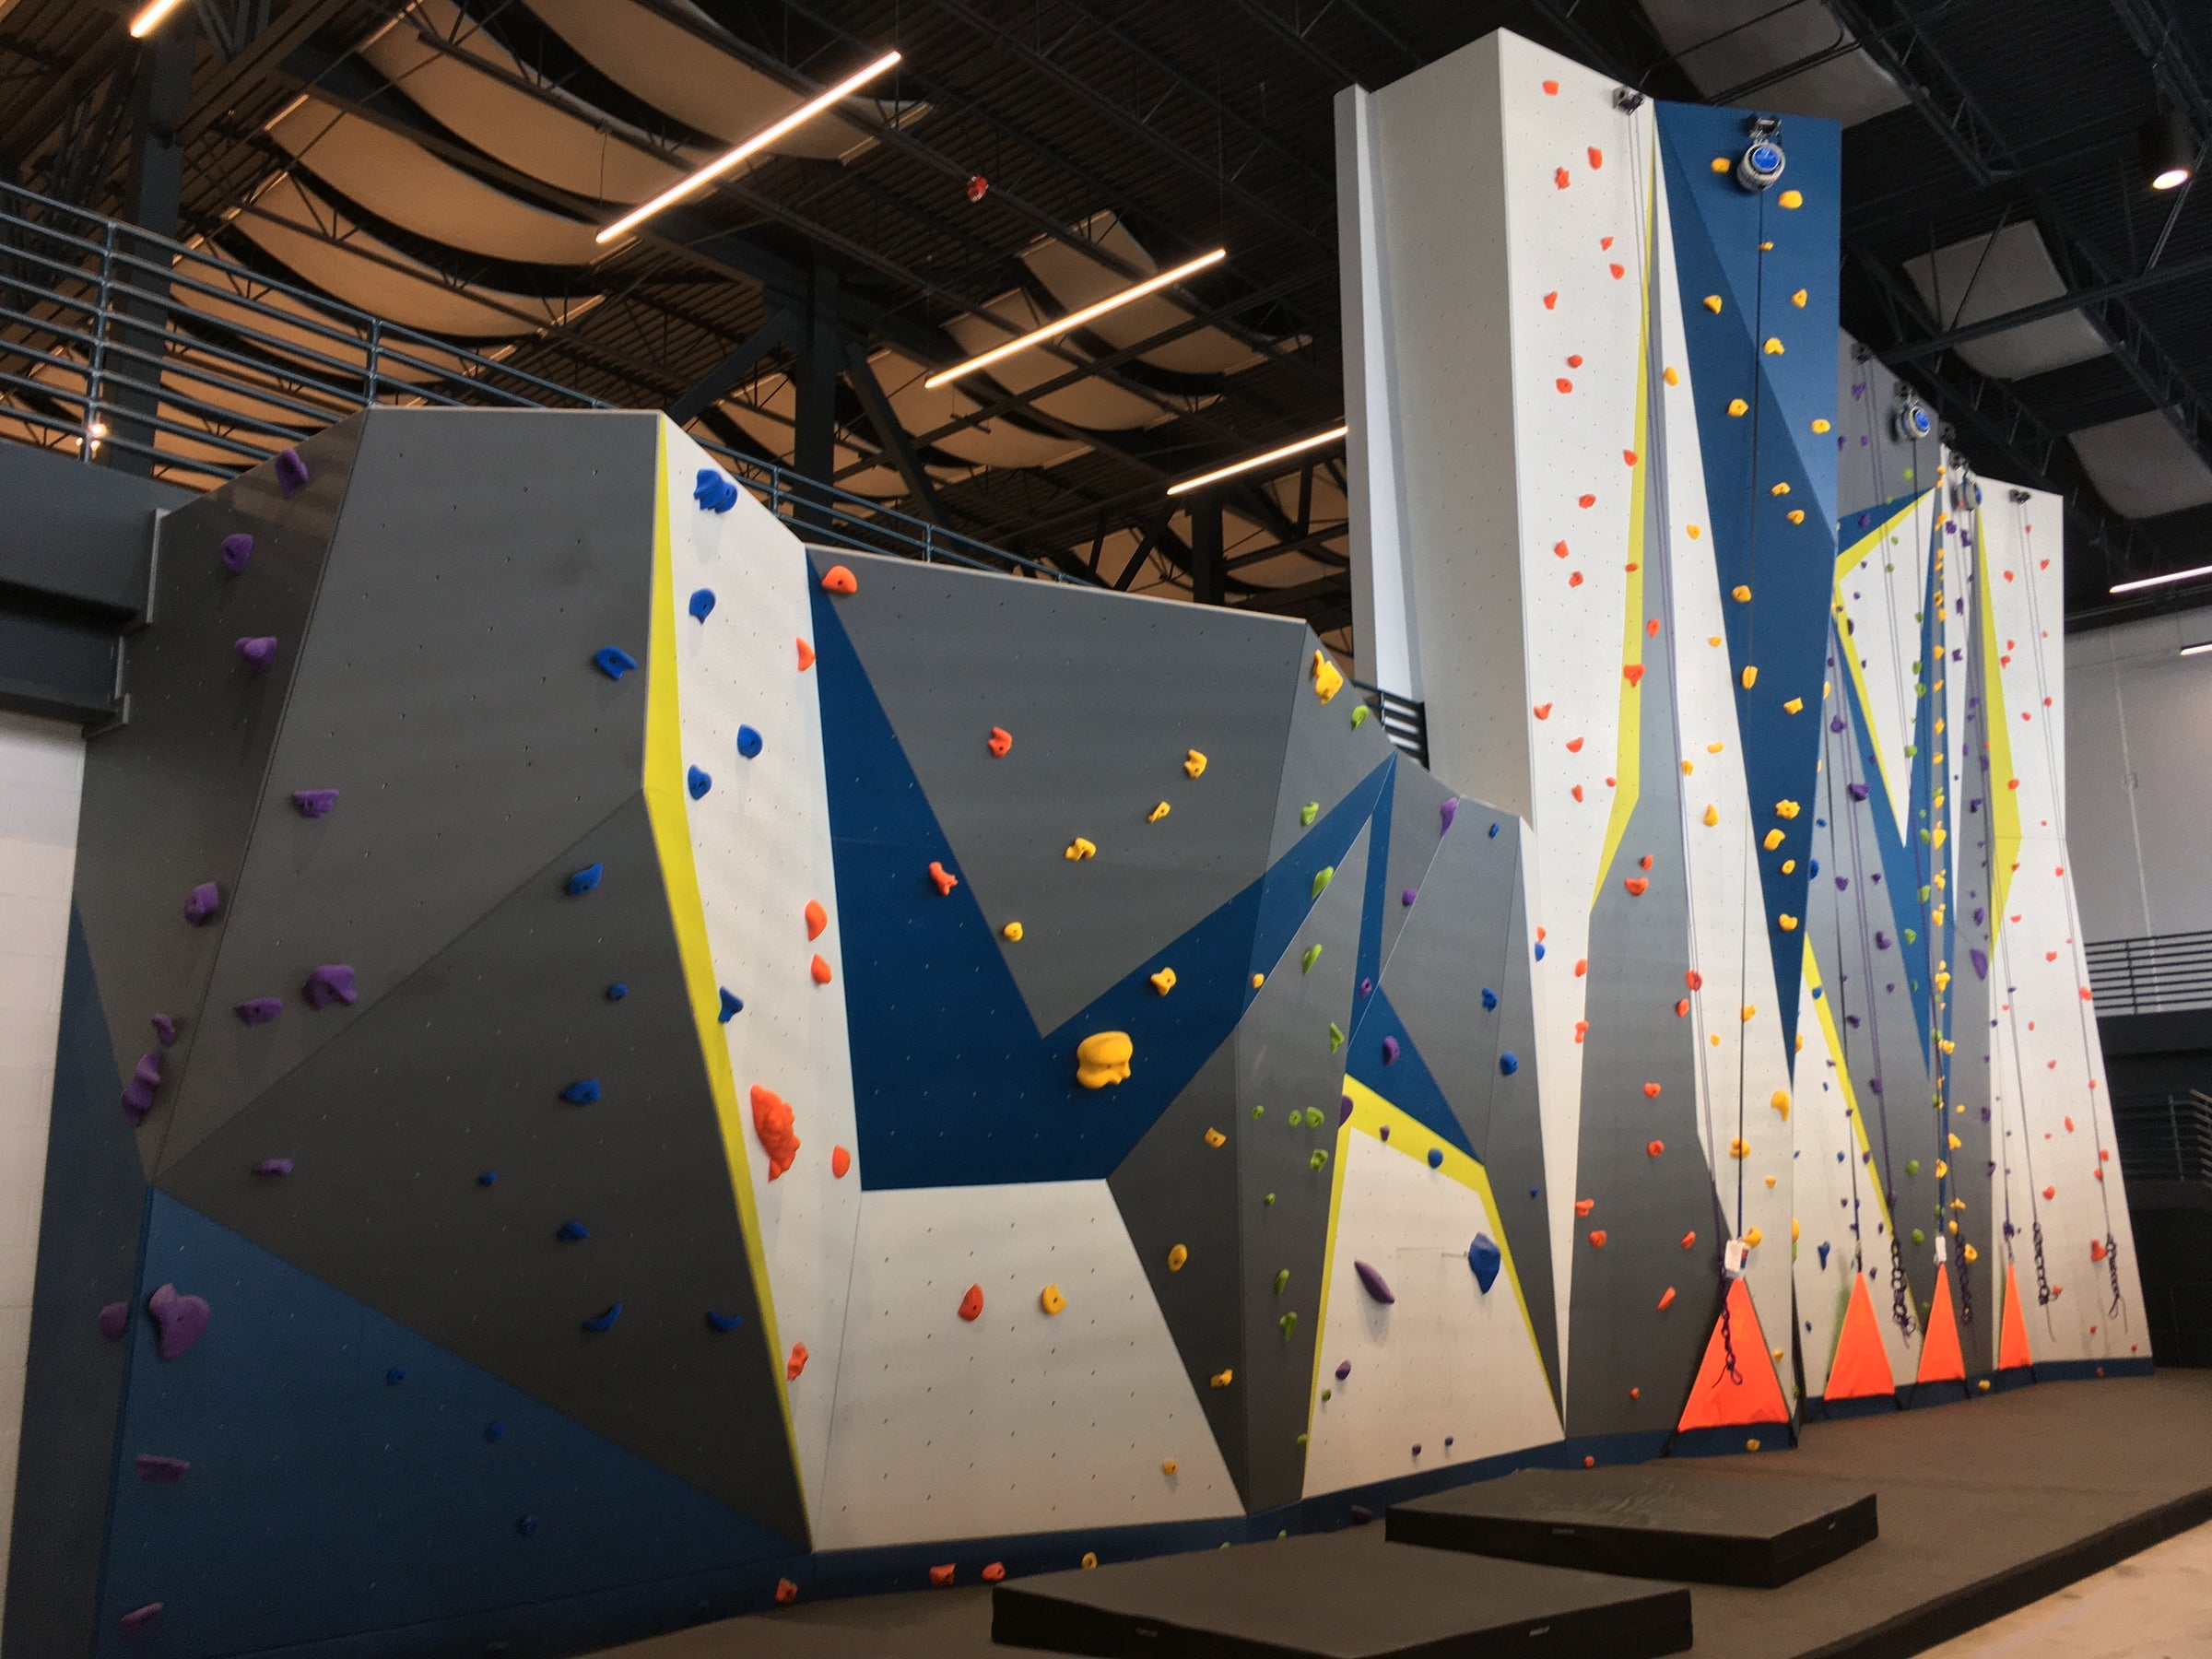 A sport climbing wall in a recreation center with bouldering and lead climbing sections